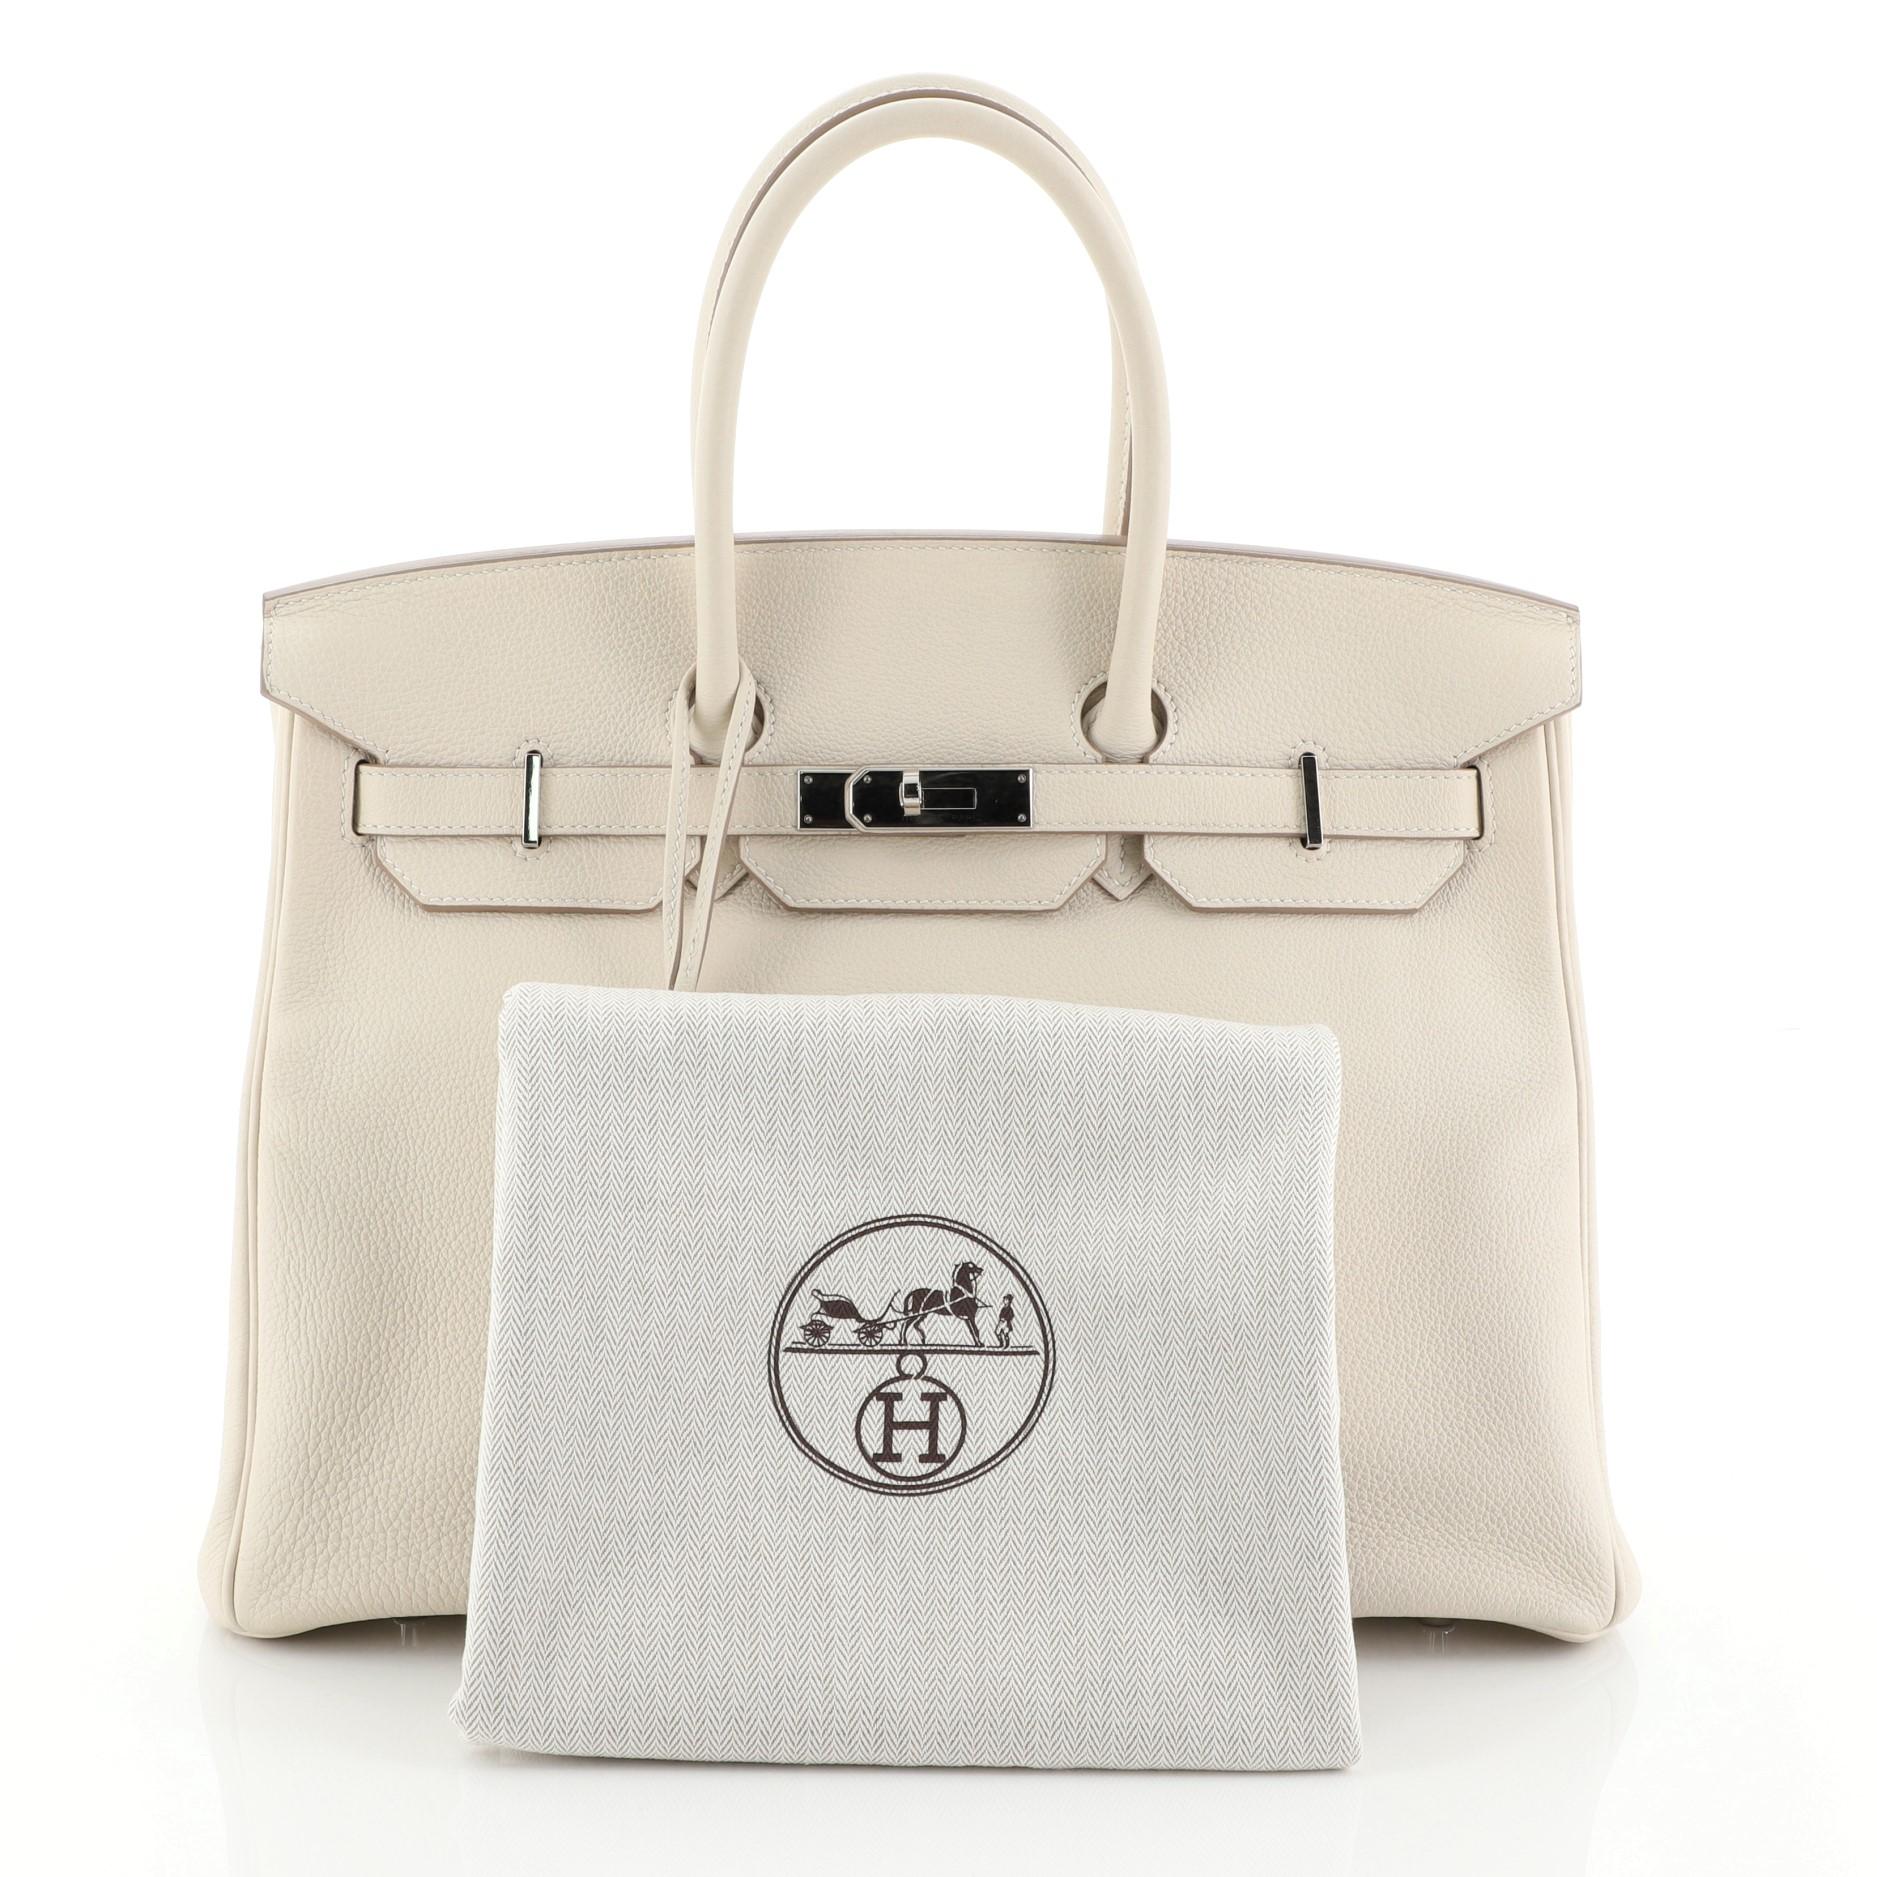 This Hermes Birkin Handbag Craie Togo with Palladium Hardware 35, crafted in Craie neutral Togo leather, features dual rolled handles, frontal flap, and palladium hardware. Its turn-lock closure opens to a Craie neutral Chevre leather interior with